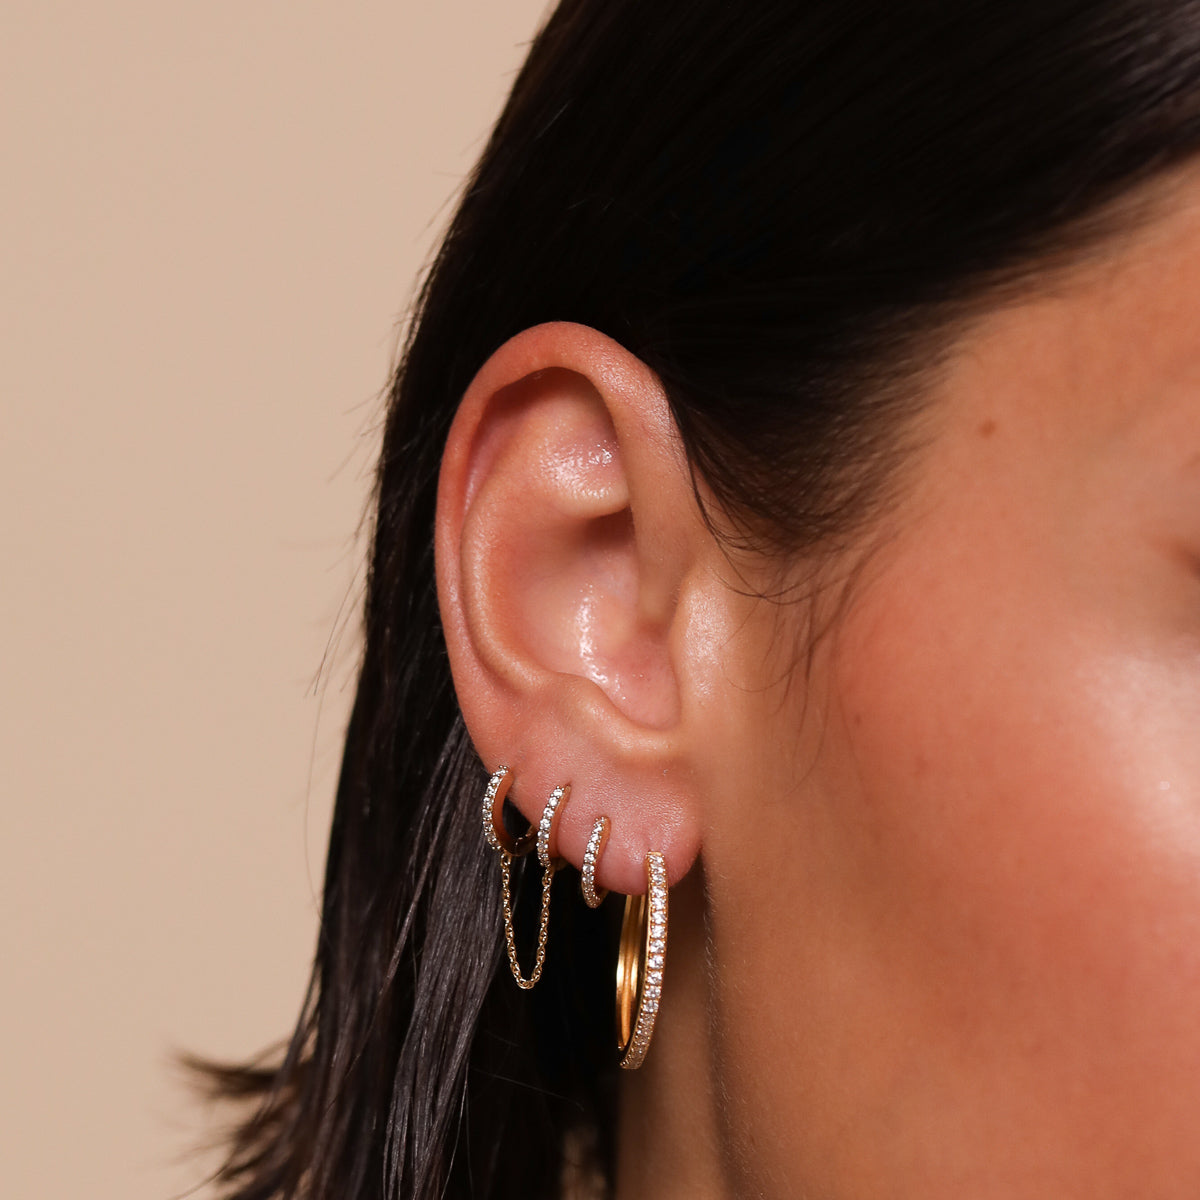 Orbit Crystal Huggies in Gold worn stacked with other earrings